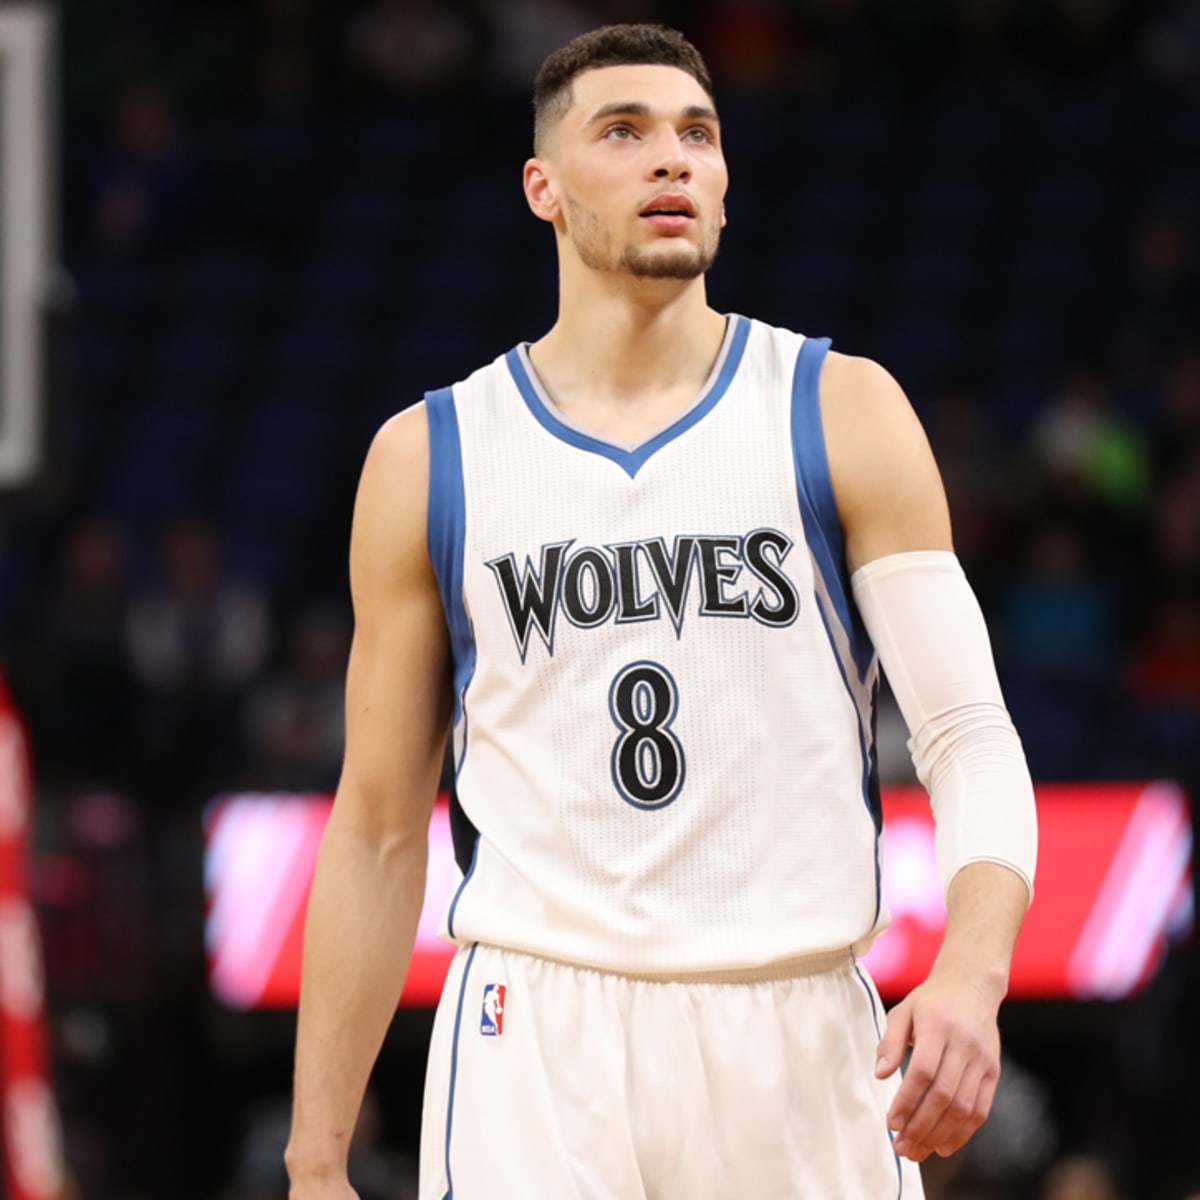 NBA Star Zach Lavine Surprises Kids At Sneaker Shop With New